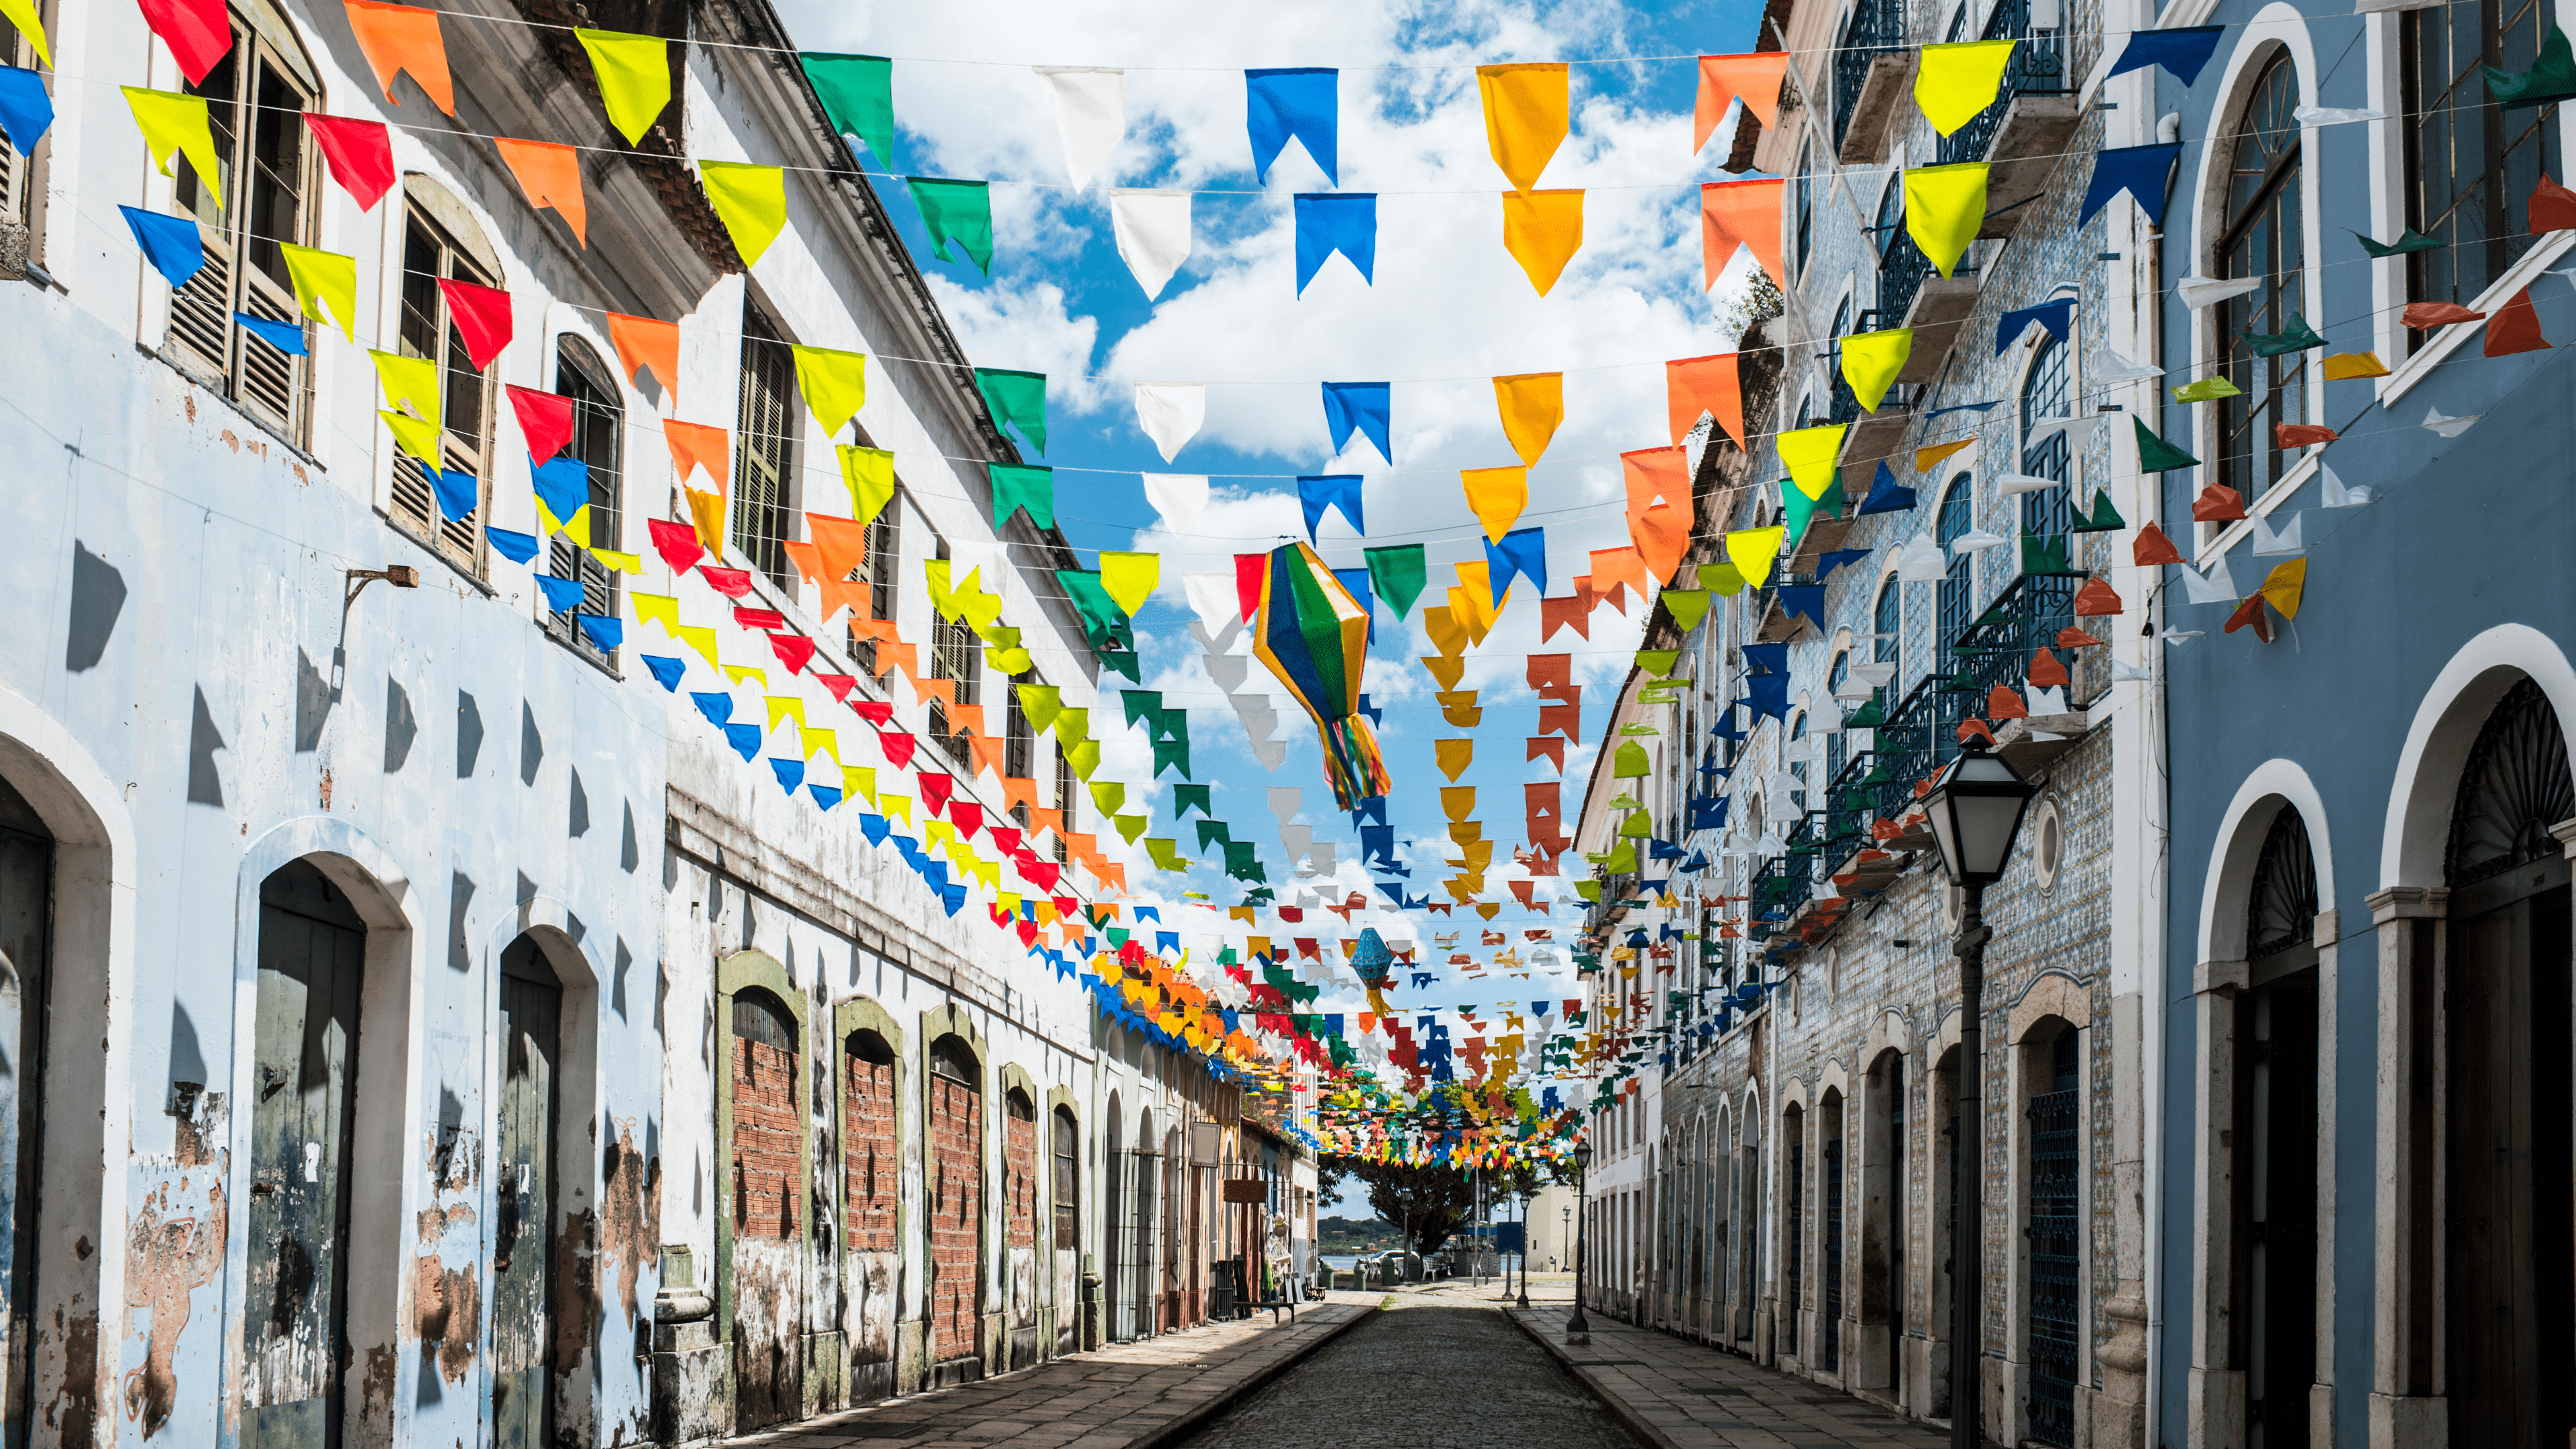 Brazil city with colored flags stretched over walkway